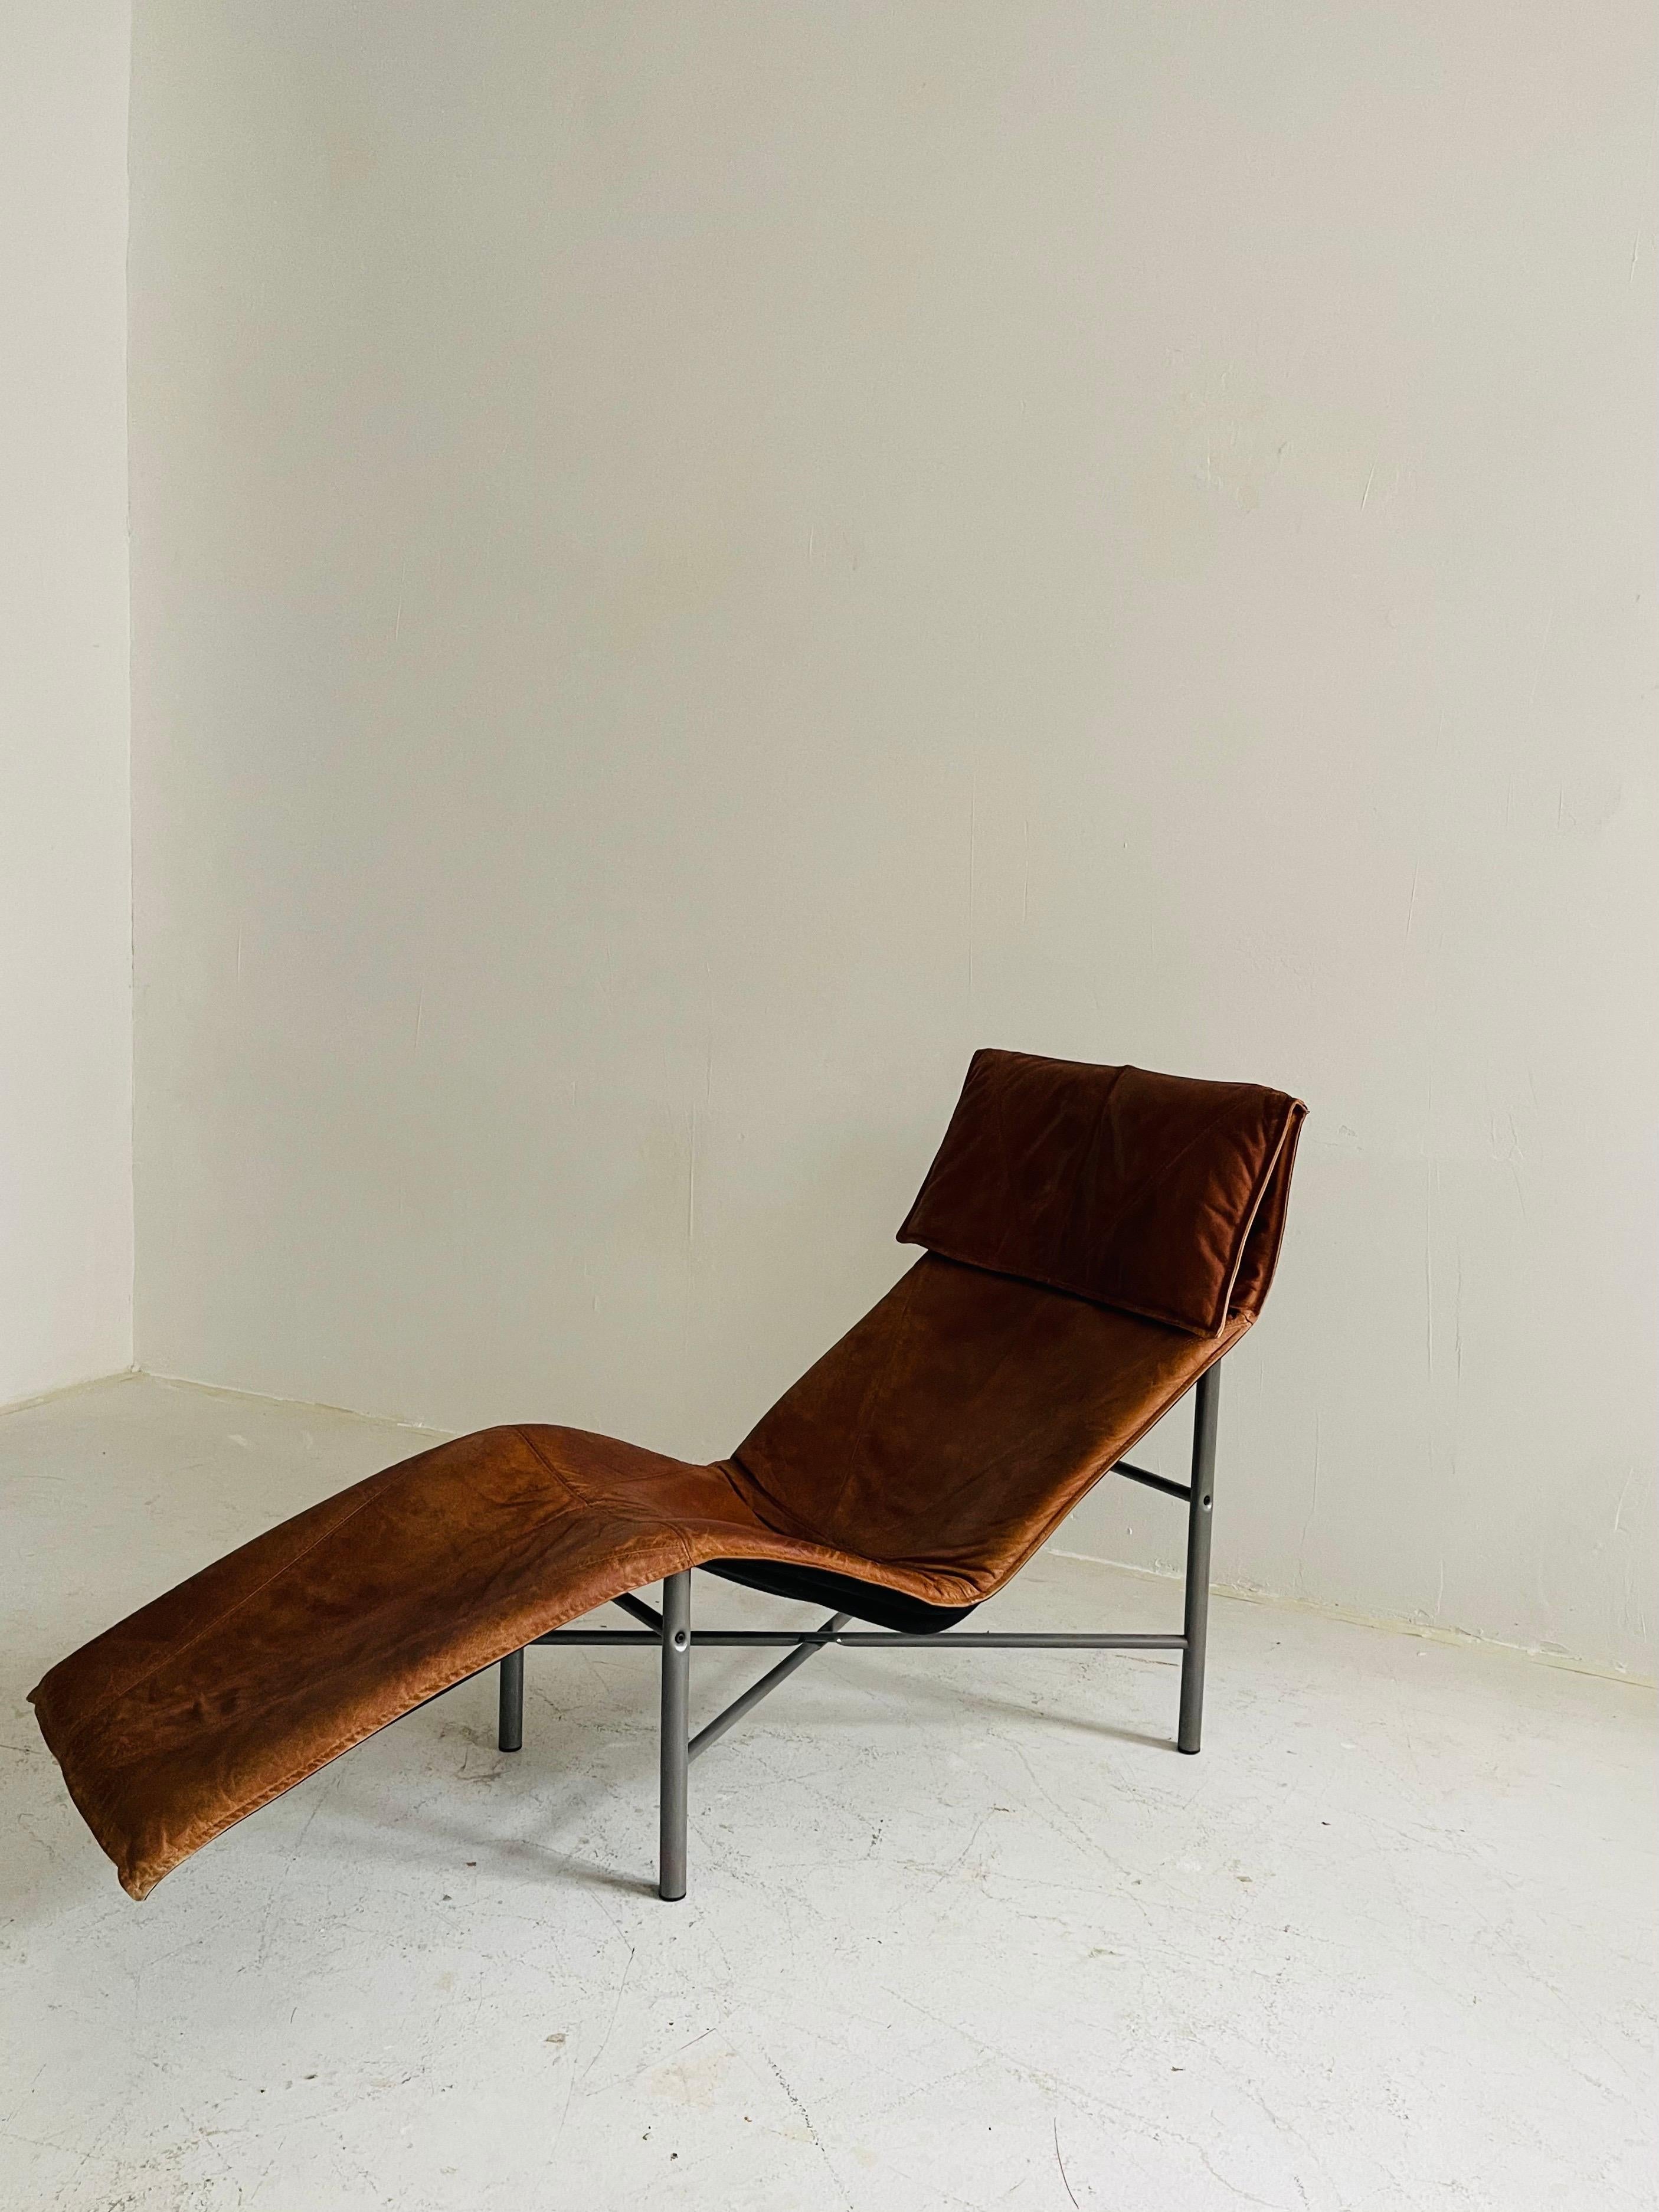 Patinated Cognac Leather Chaise Longue by Tord Bjorklund, Sweden, 1970 For Sale 8